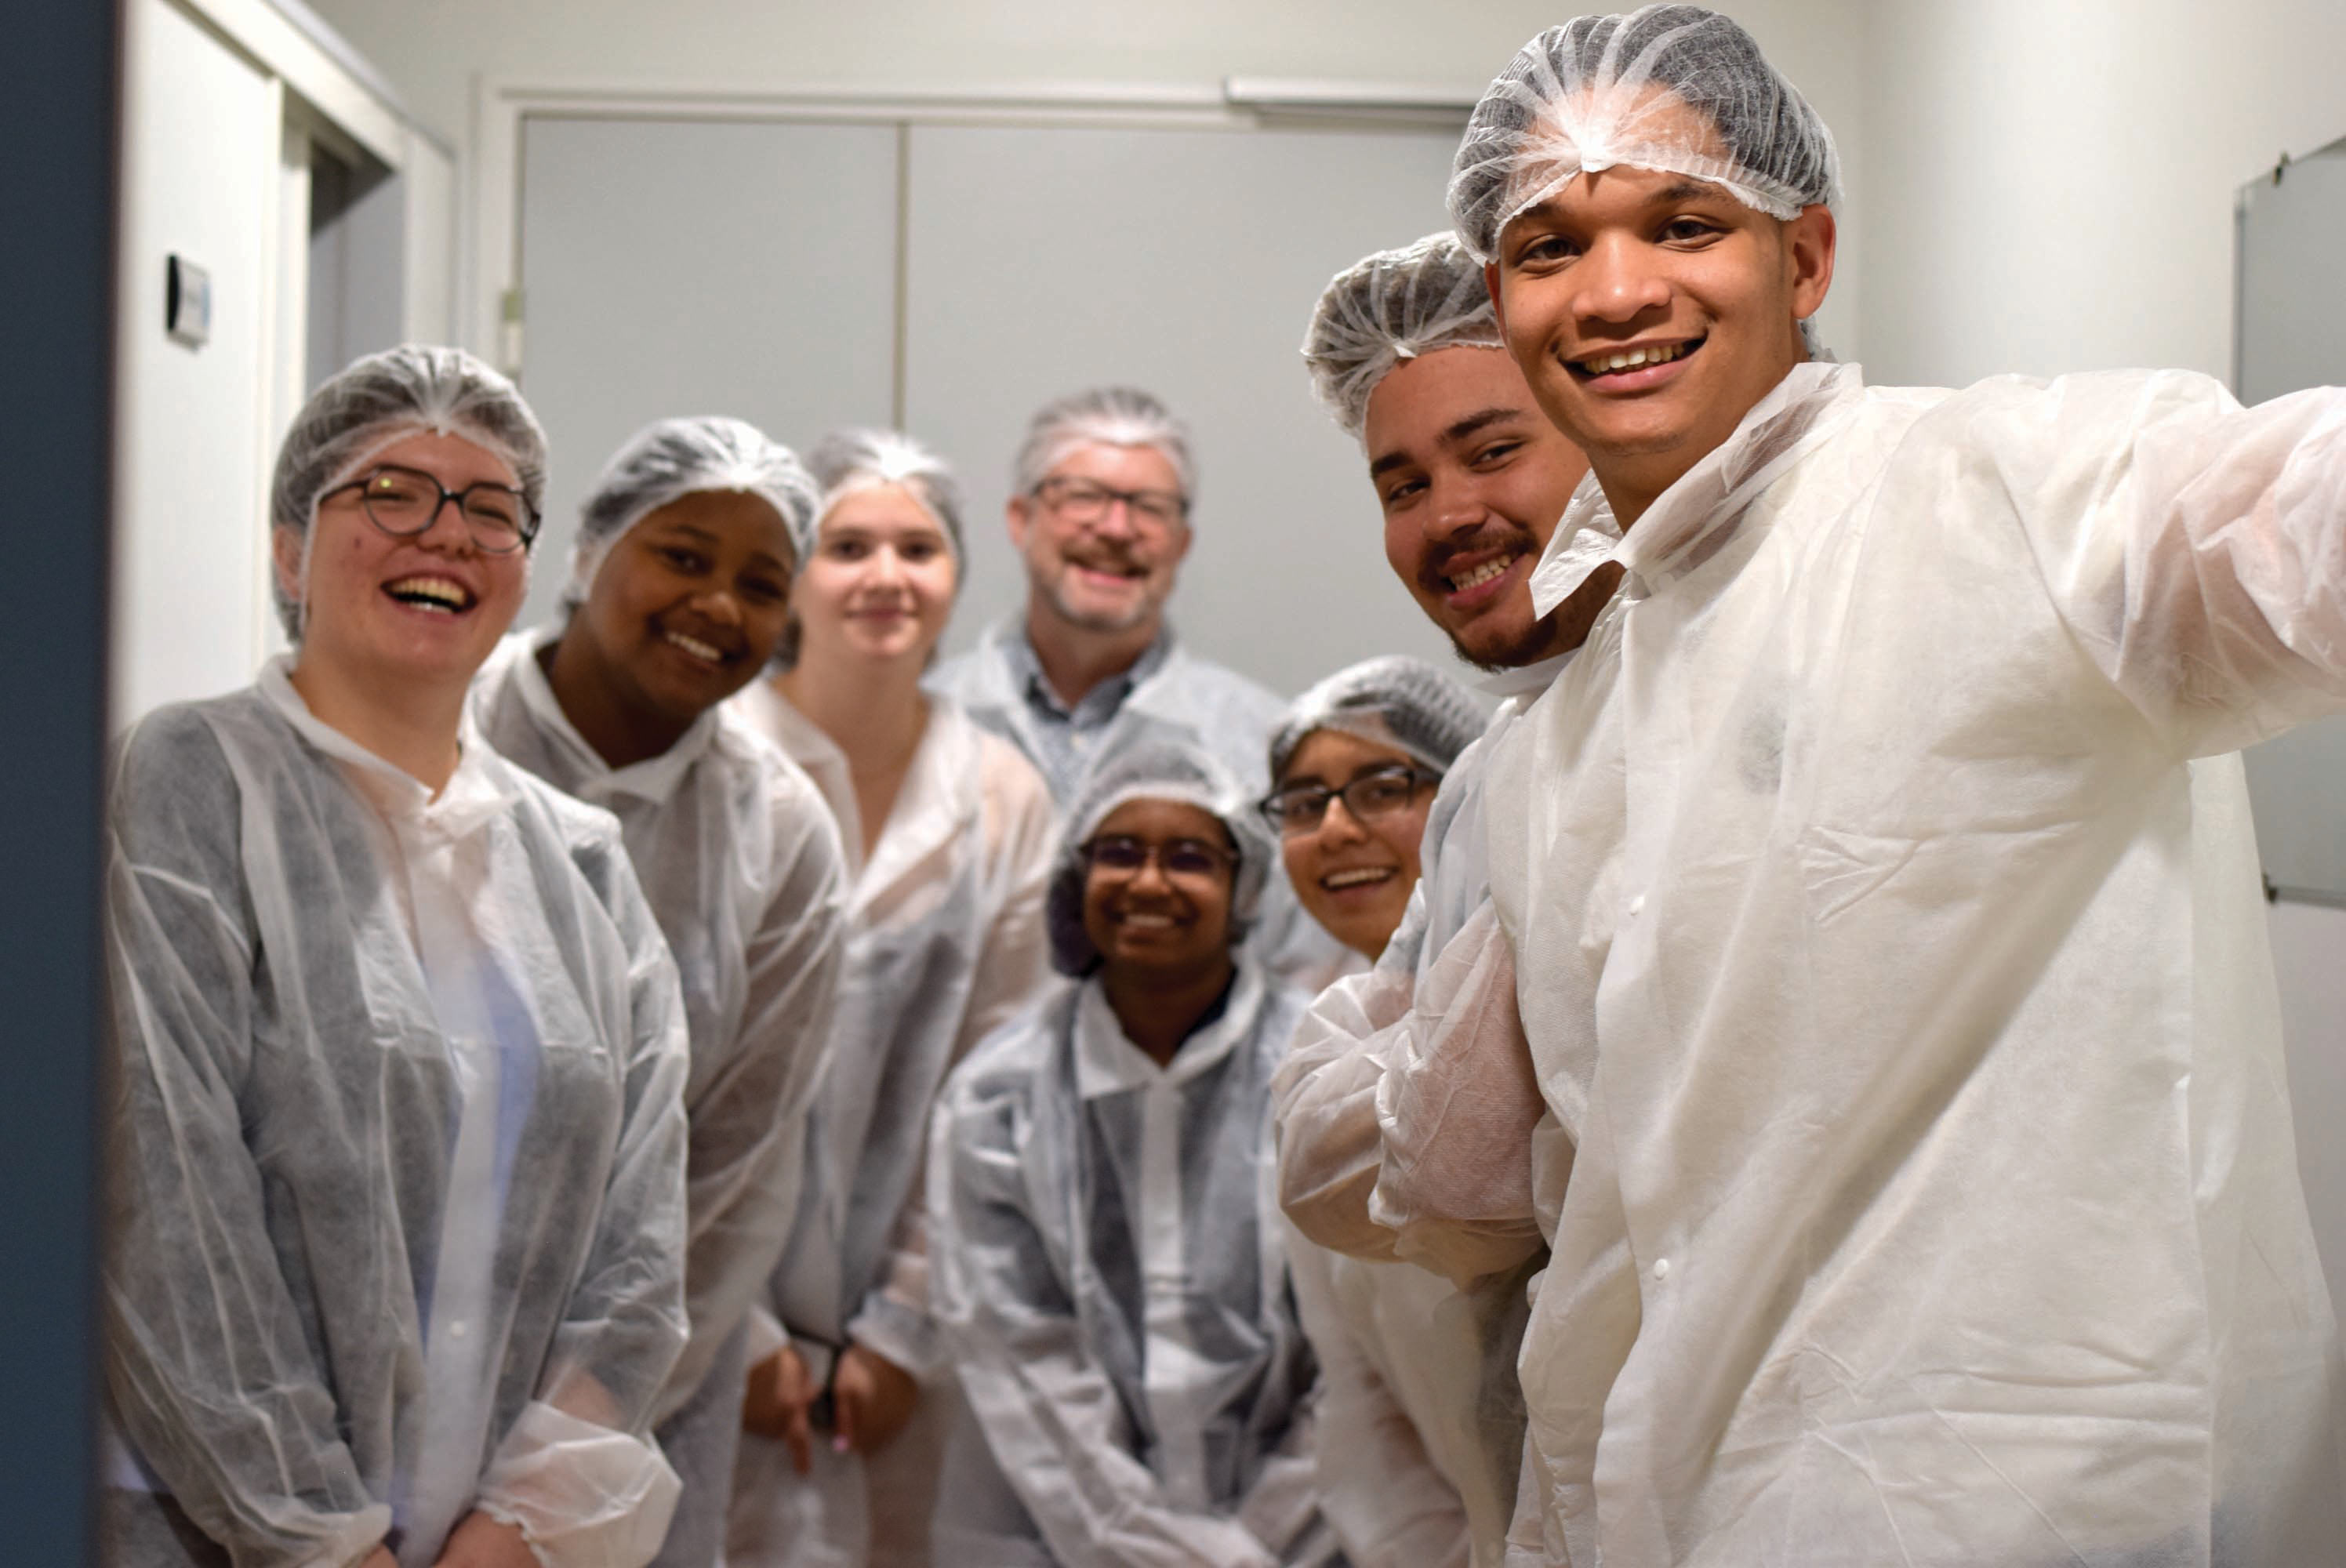 OSU students tour the Sothy’s plant in Ussac, France. The plant produces 400 tons of cosmetics annually, and through its efforts to meet U.N. Sustainability Goals, the facility has achieved a 40% reduction in energy usage going back to 2014.